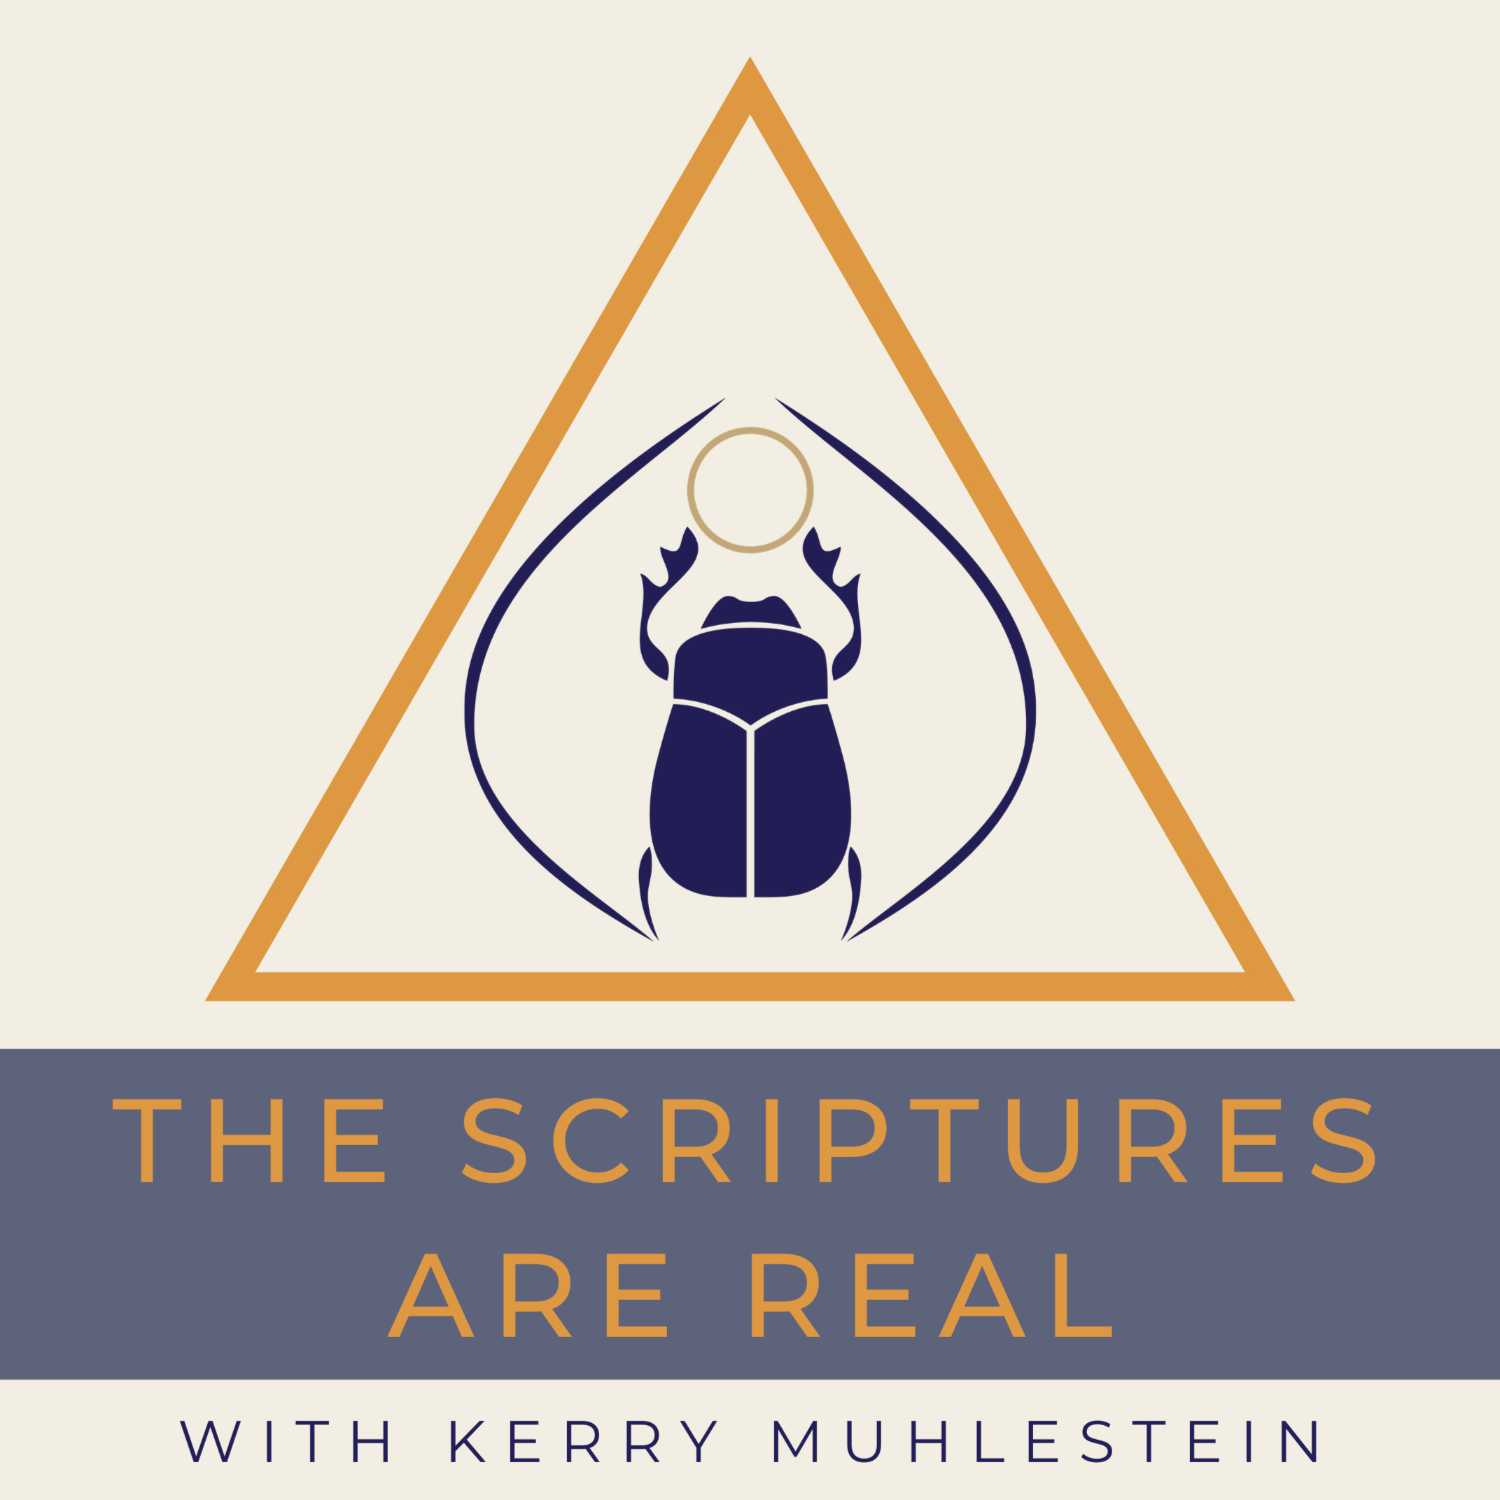 Shon Hopkin on the Parables of the Lost (week of May 1, first to listen to)